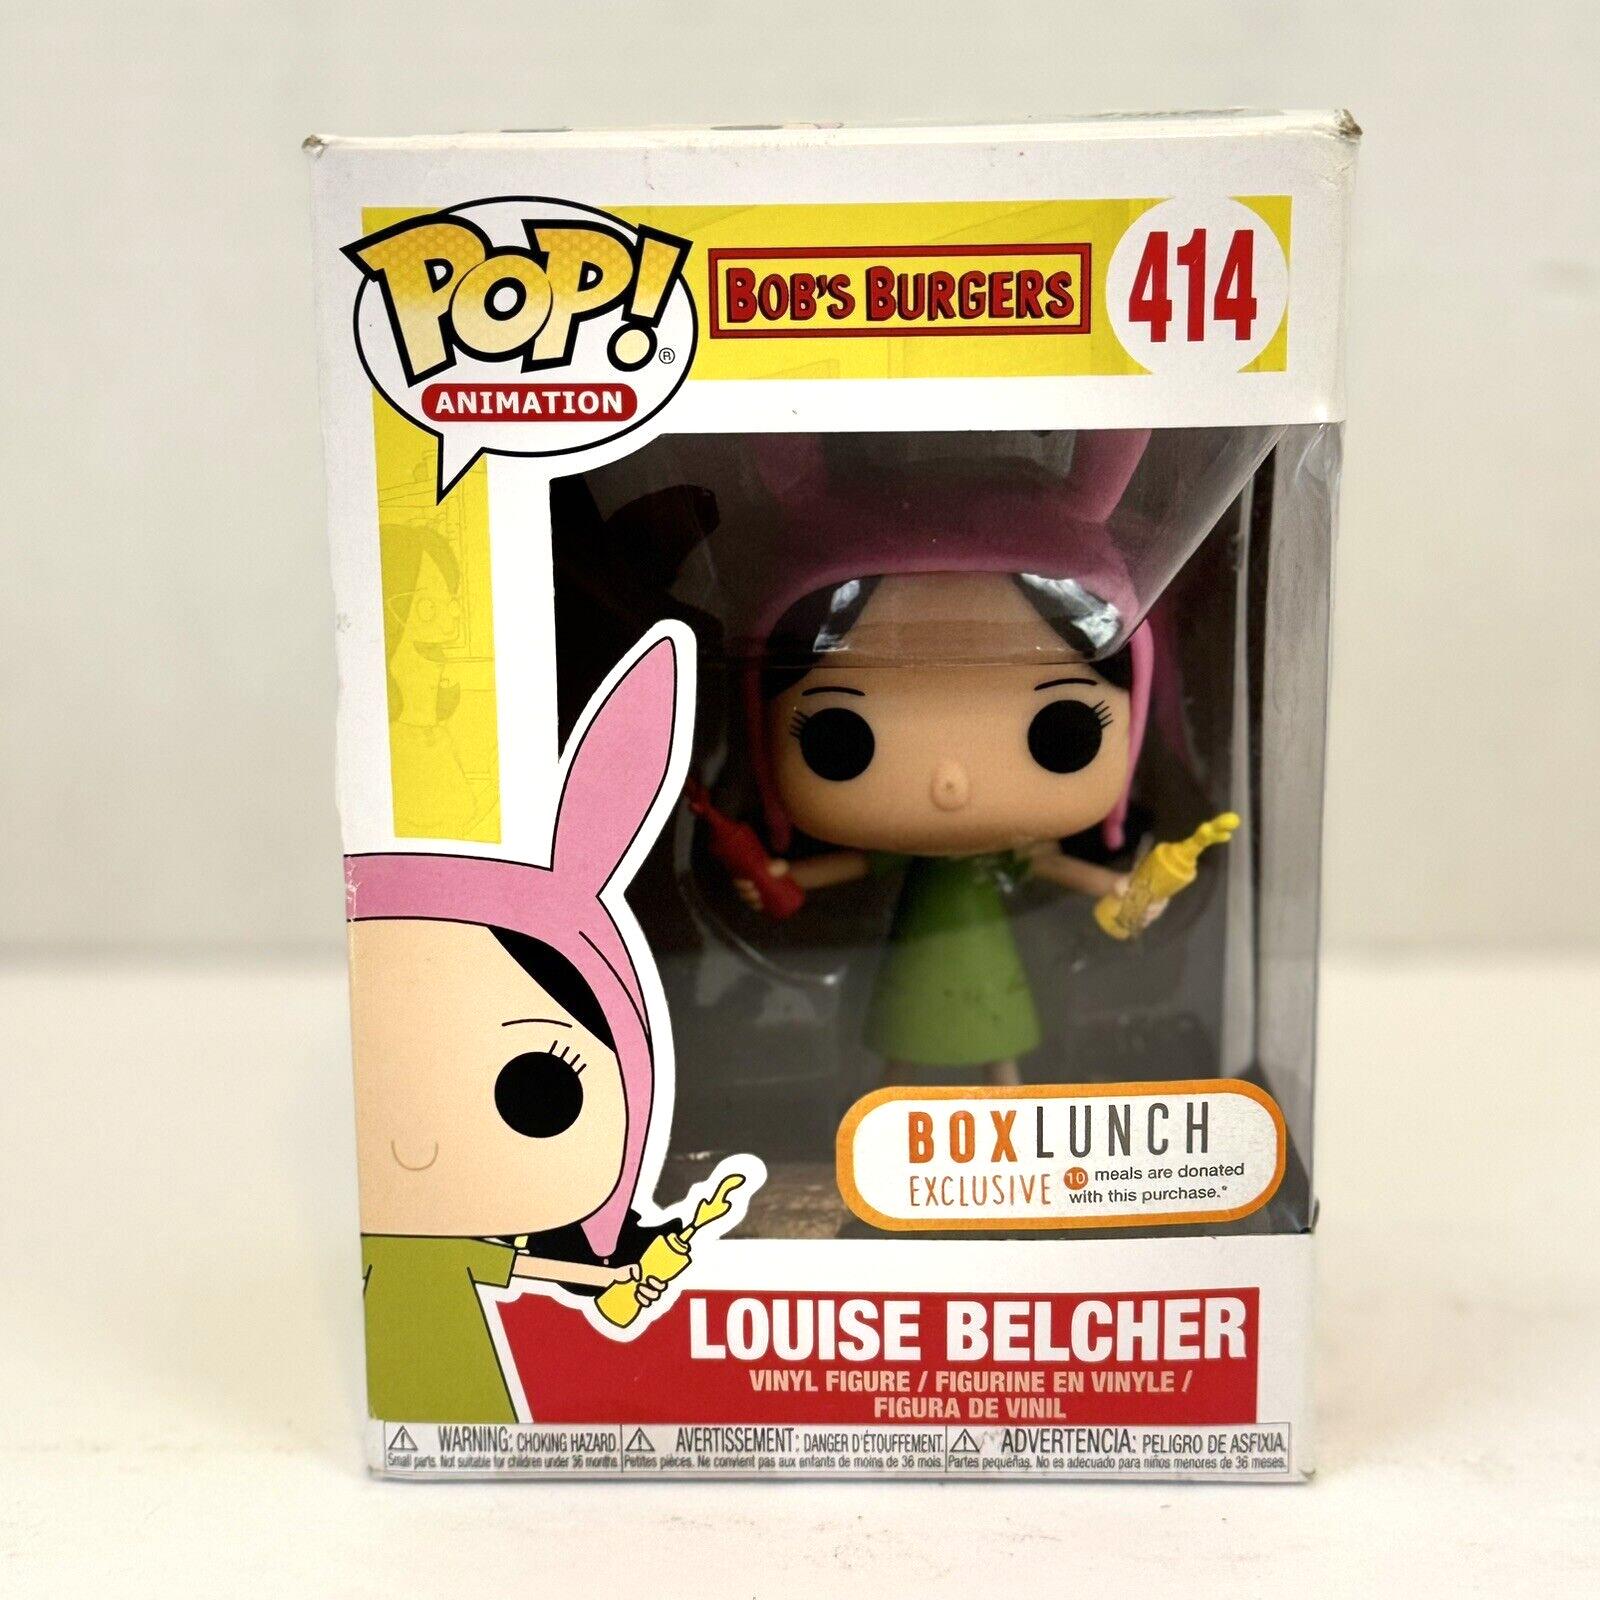 Funko Pop Bob's Burgers #414 Louise Belcher Box Lunch Exclusive - New (other)